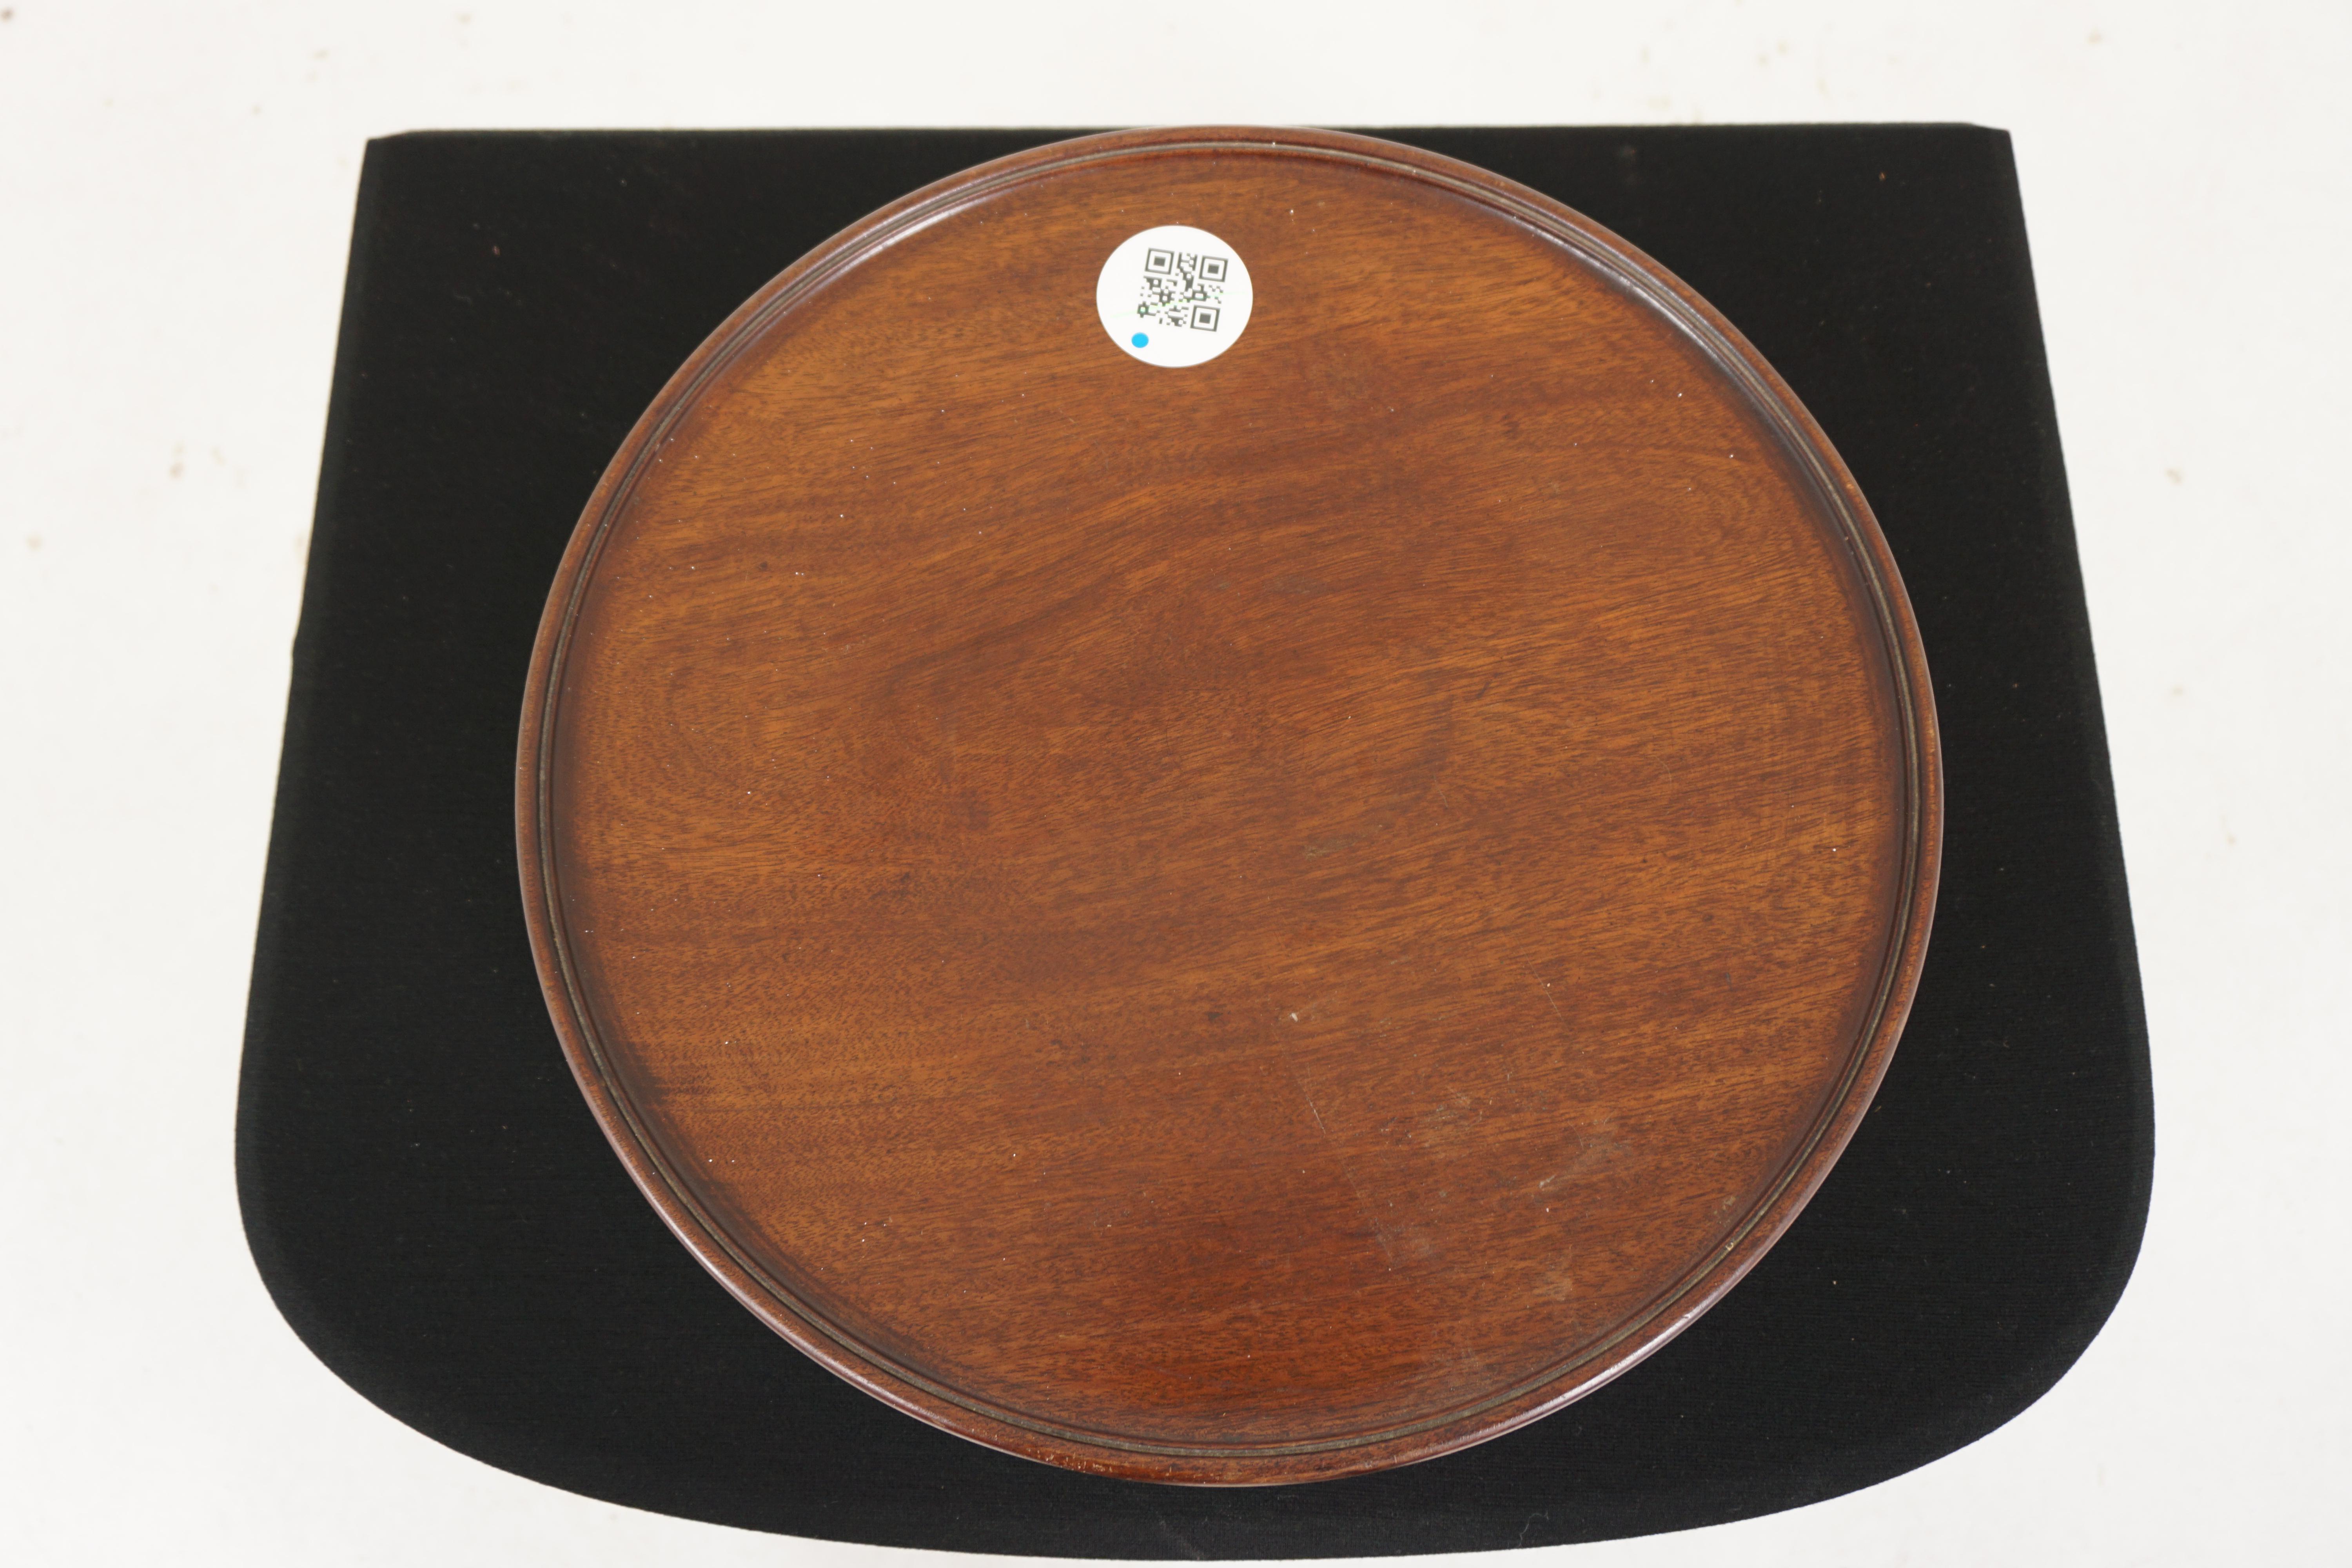 Vintage revolving walnut circular table top platter (Lazy Susan), Scotland 1920, H158

Scotland 1920
Solid walnut
Original finish
Circular moulded top
Raised on a tapering central column 
Standing upon a deep tapered circular base
Table top rotates